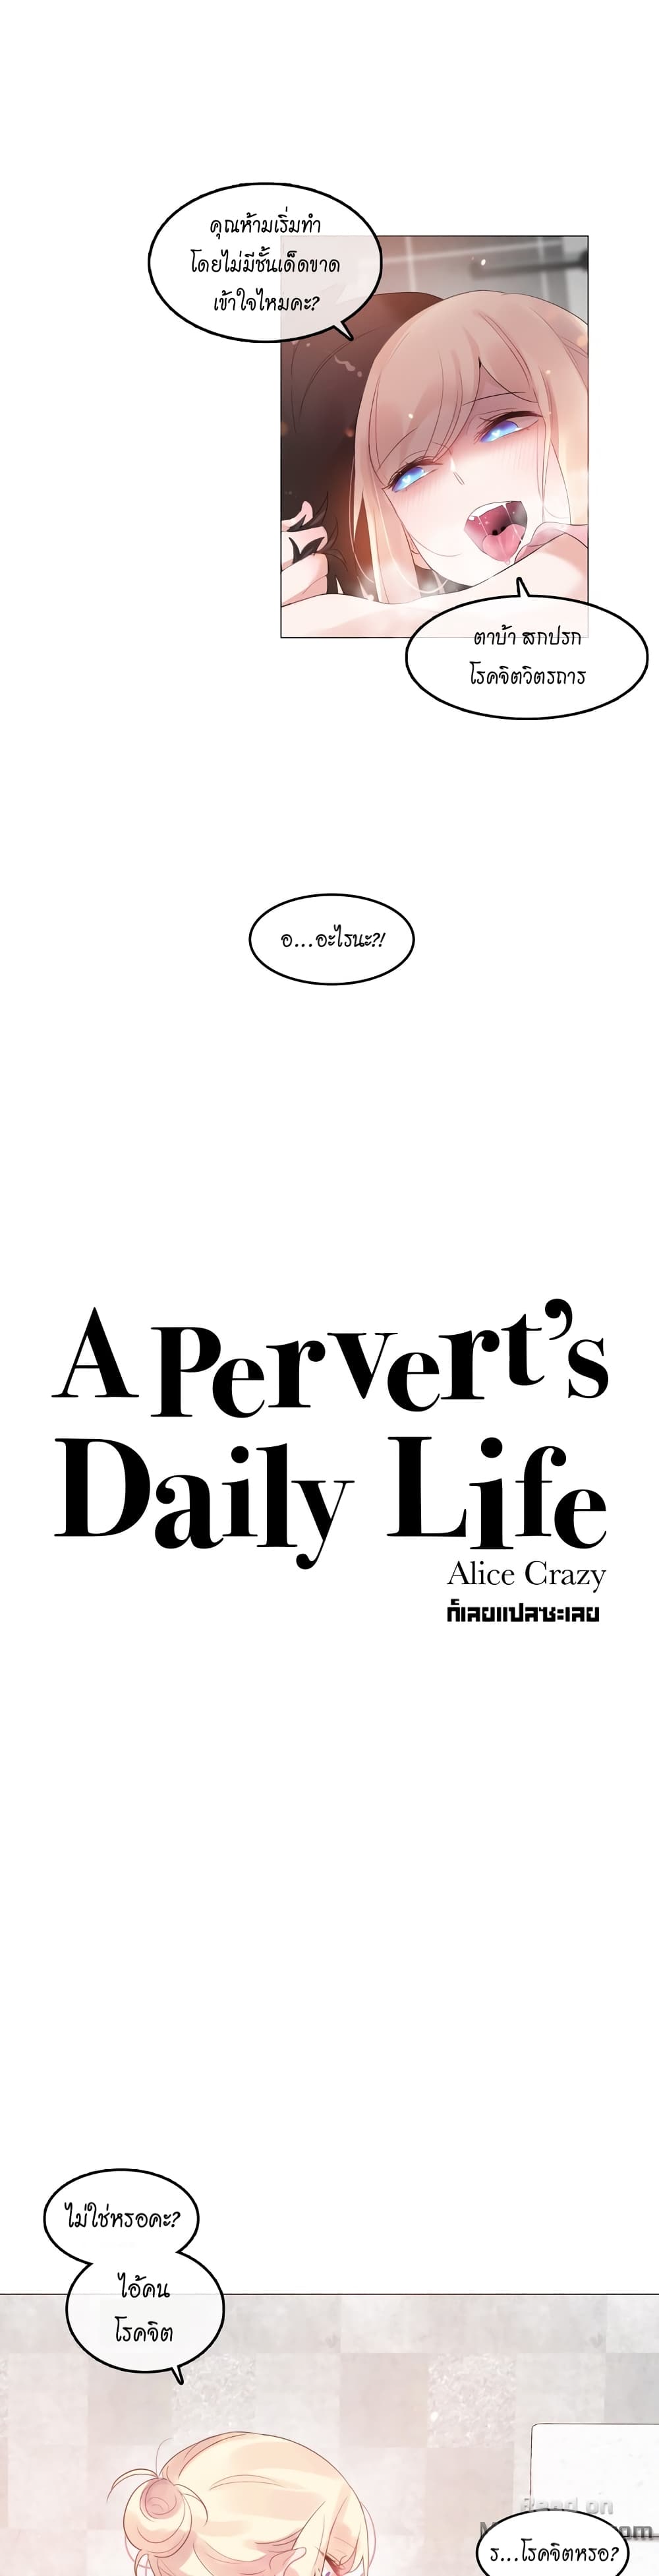 A Pervert's Daily Life 69-69